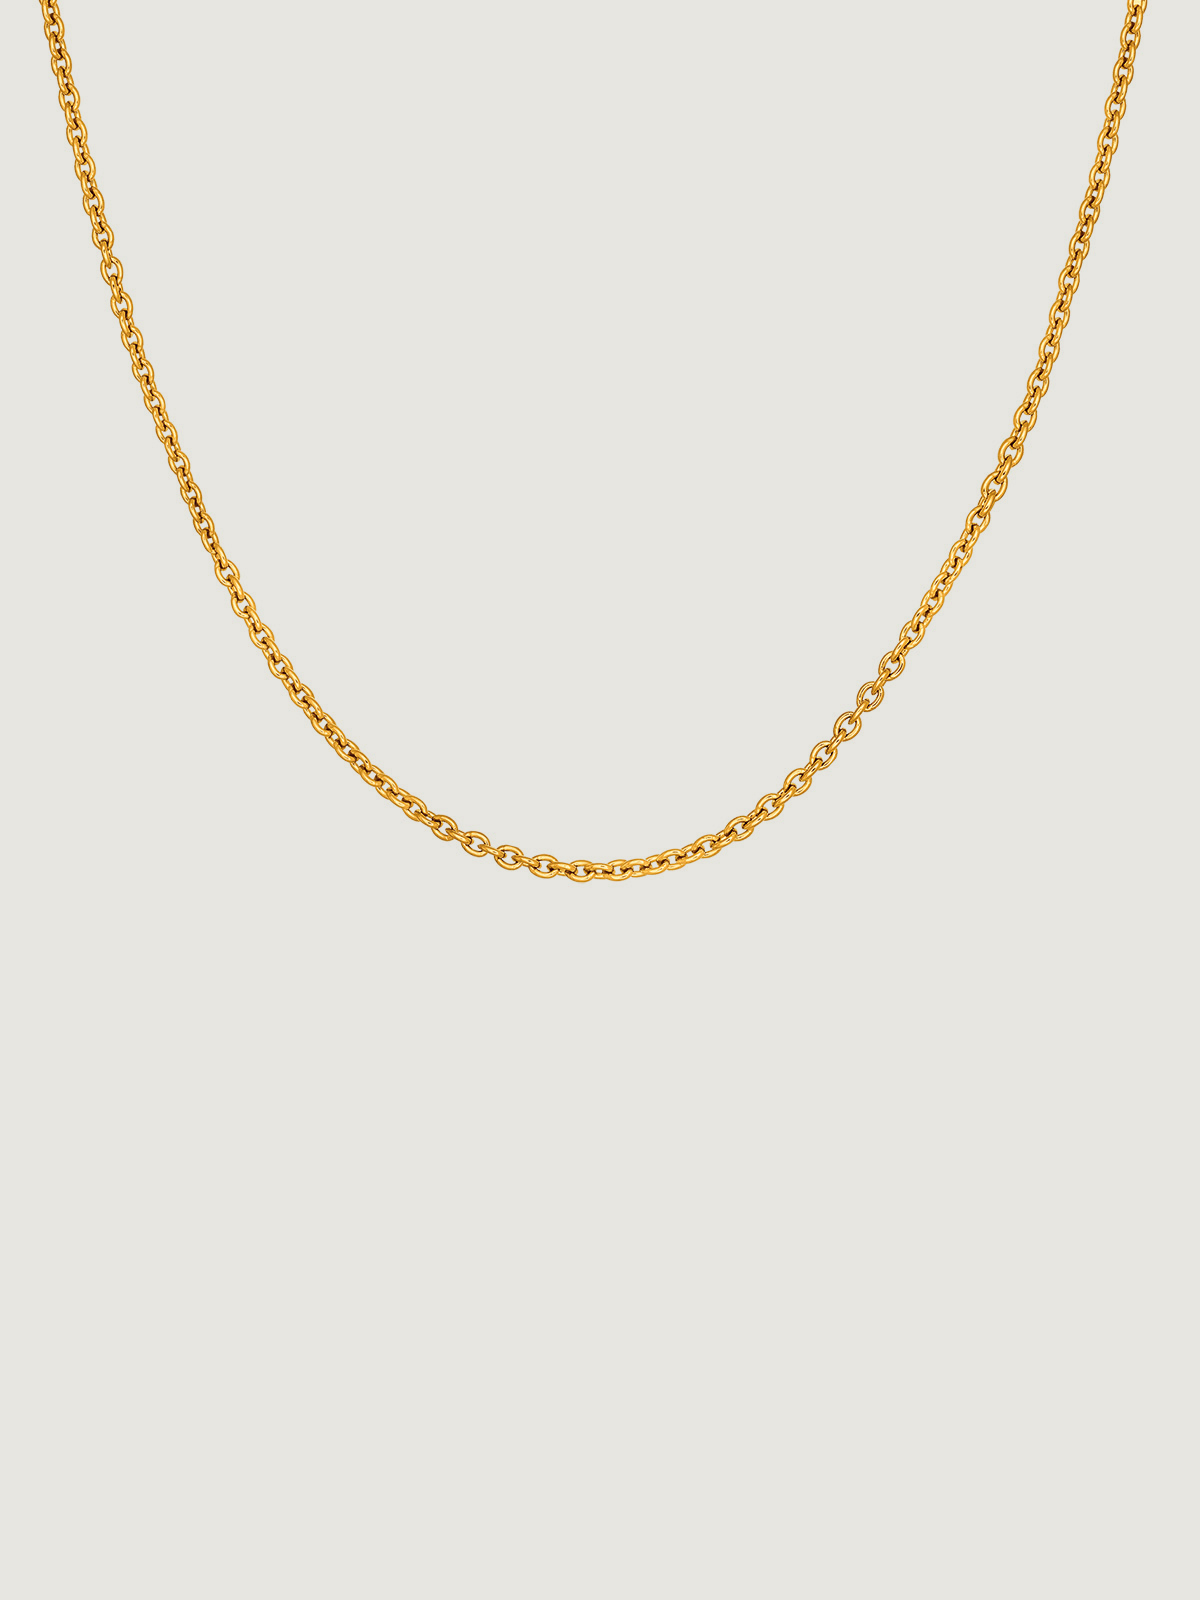 Simple adjustable 925 silver chain bathed in 18K yellow gold.